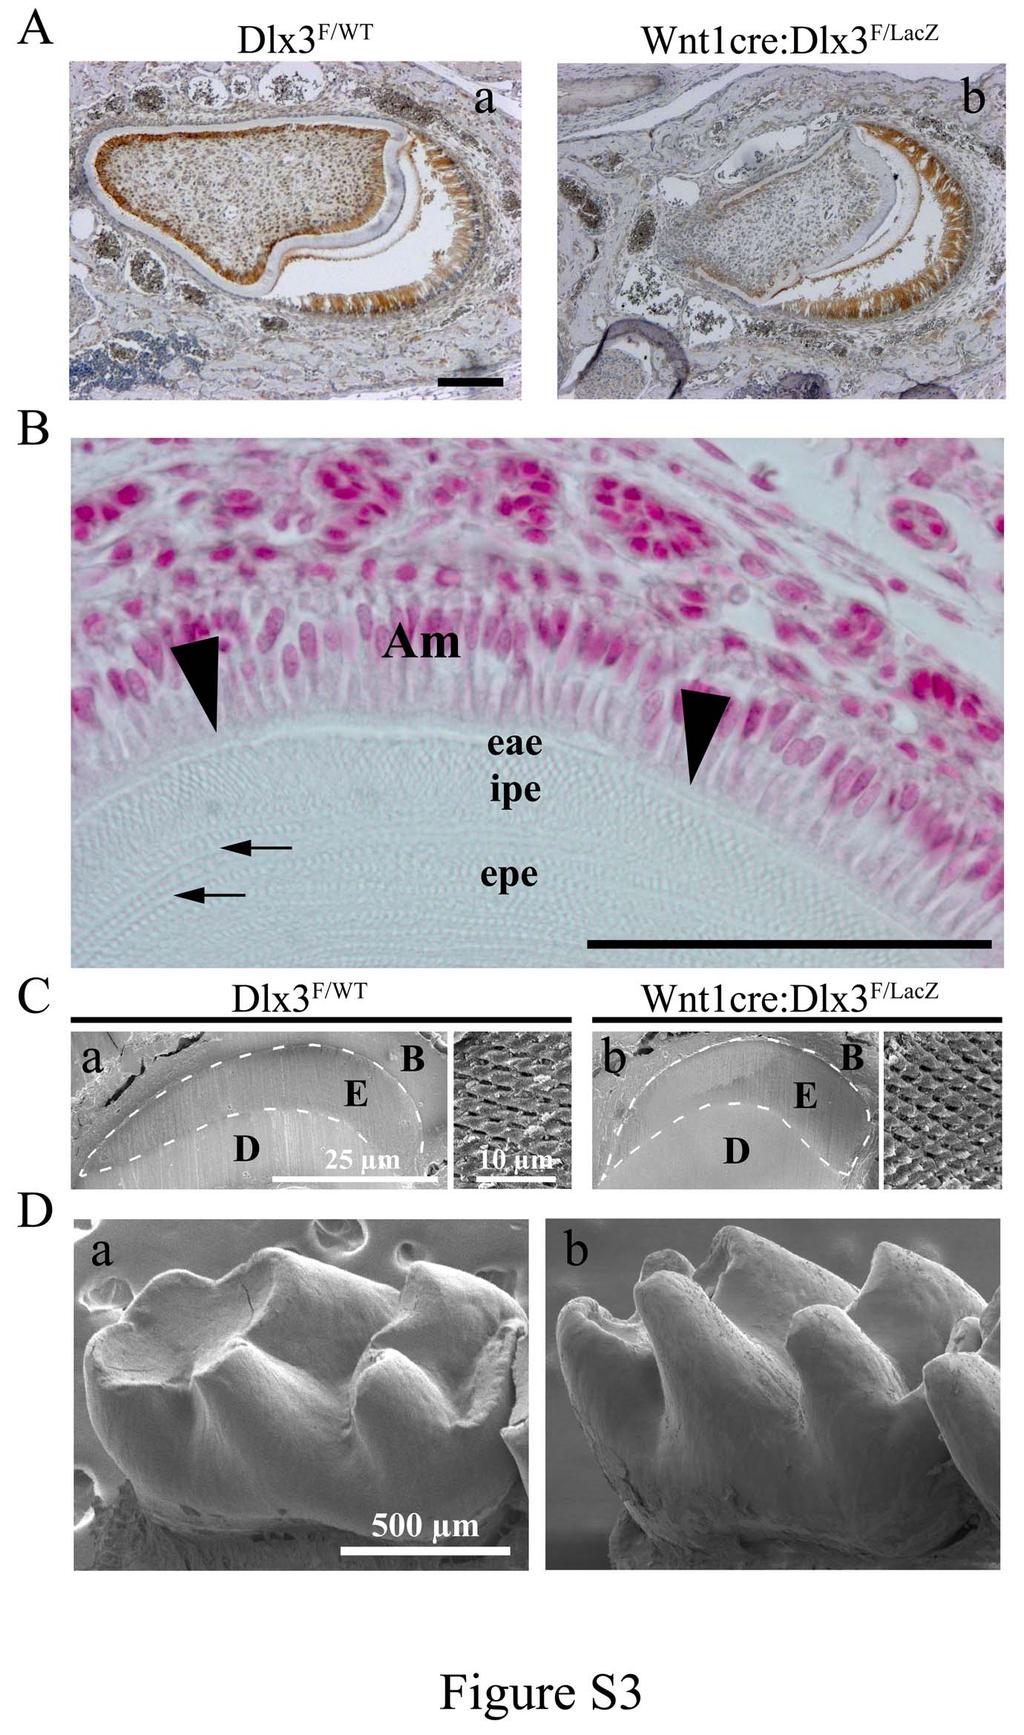 Figure S3: Ameloblast differentiation and enamel formation in Wnt1- cre:dlx3 F/LacZ mice A) Immunohistochemical analysis of Dlx3 expression in mandibular incisors (cross sections) from WT and cko